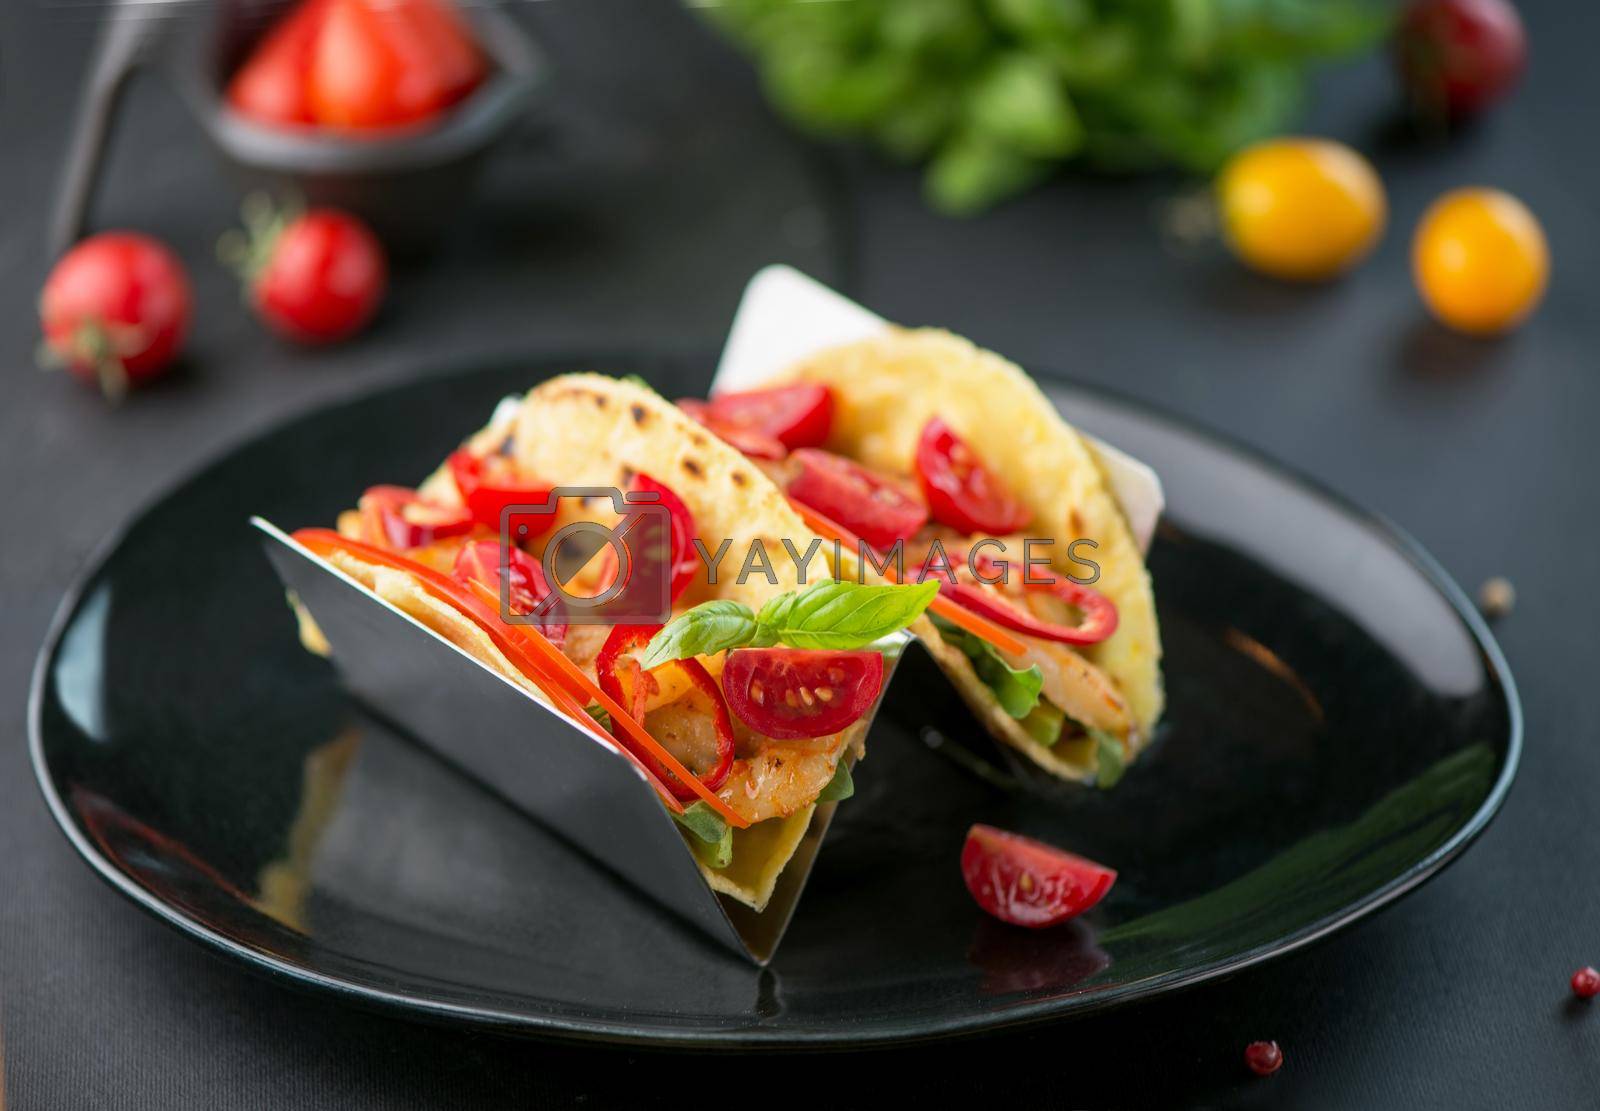 Royalty free image of mexican food. Spicy tacos with tomatoes and meat on a dark background by aprilphoto